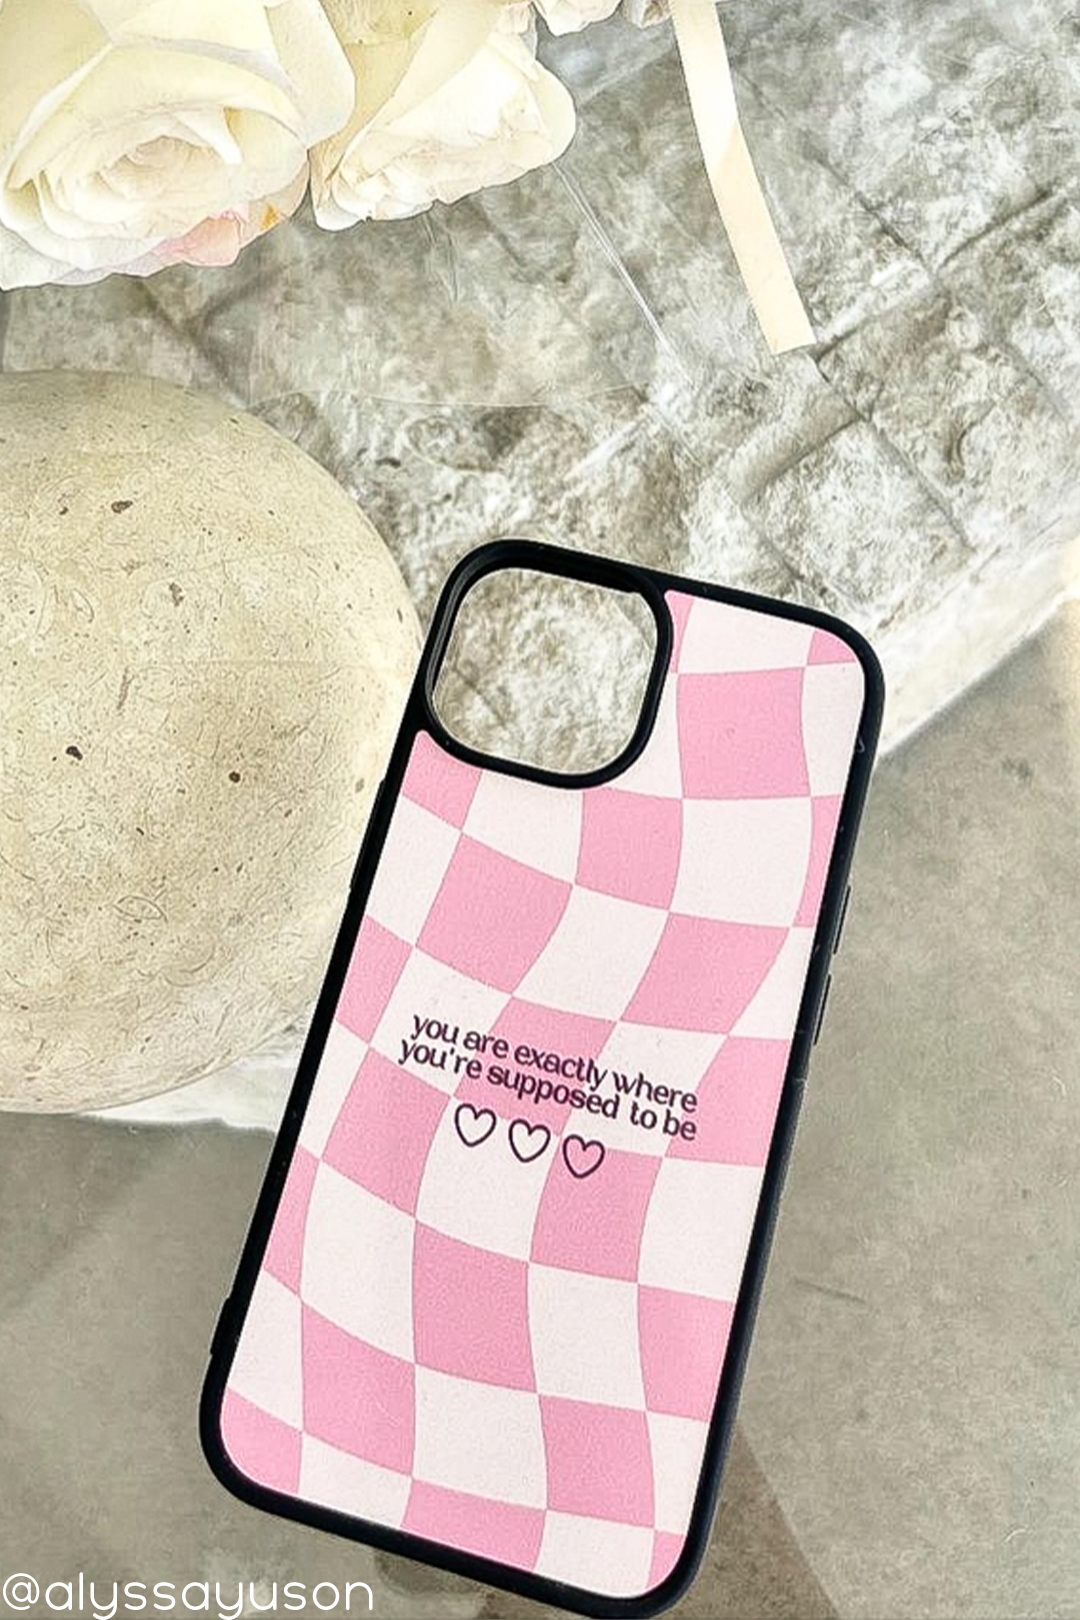 You are exactly where you're supposed to be iPhone case